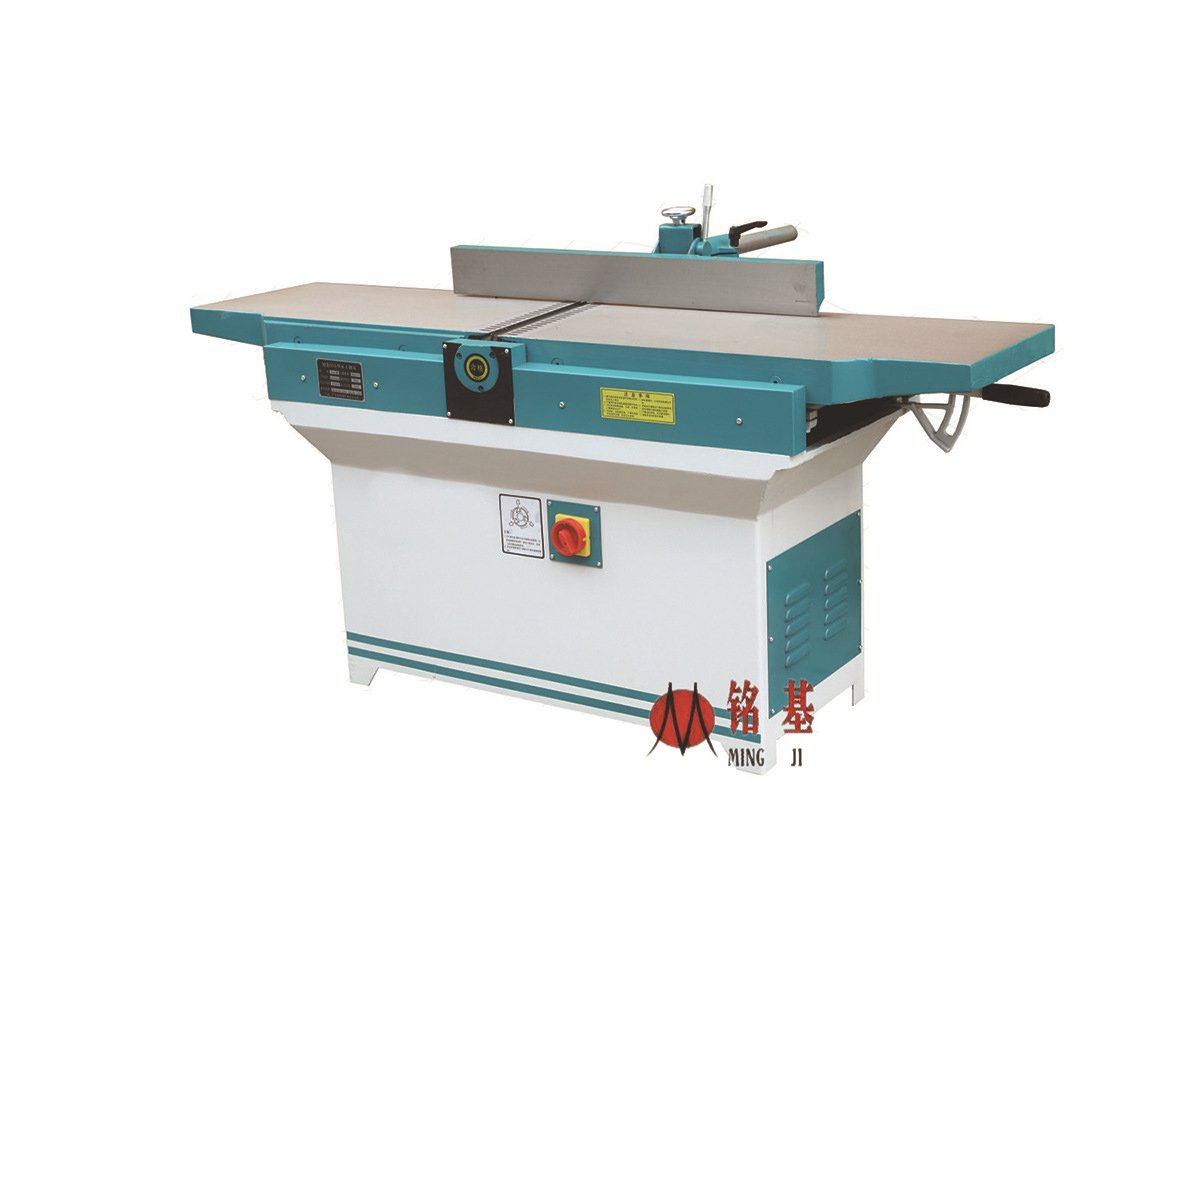 MB-504A Woodworking surface planner machine